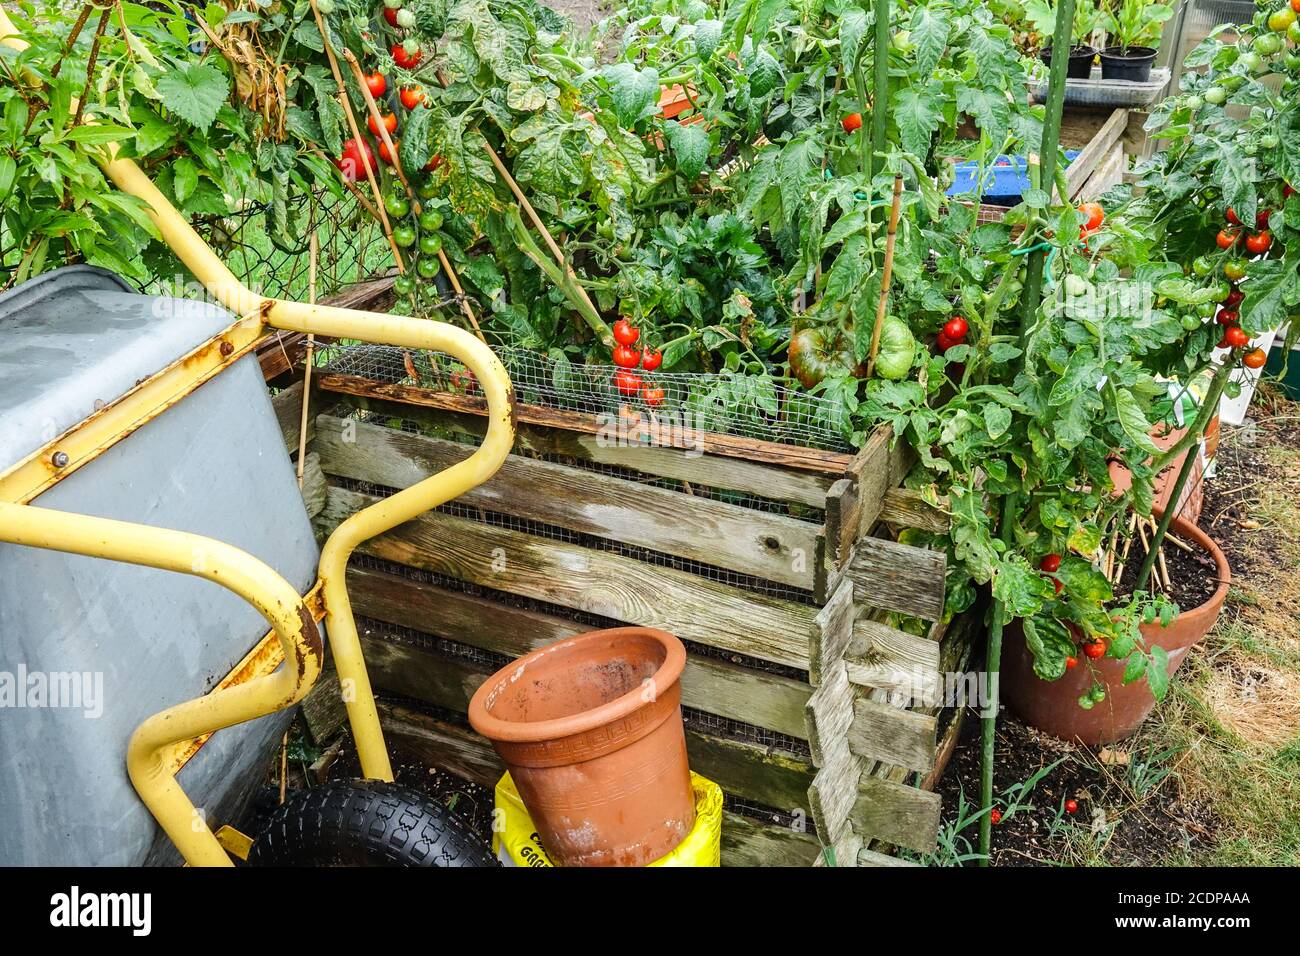 Raised bed garden tomatoes growing in allotment garden part Stock Photo